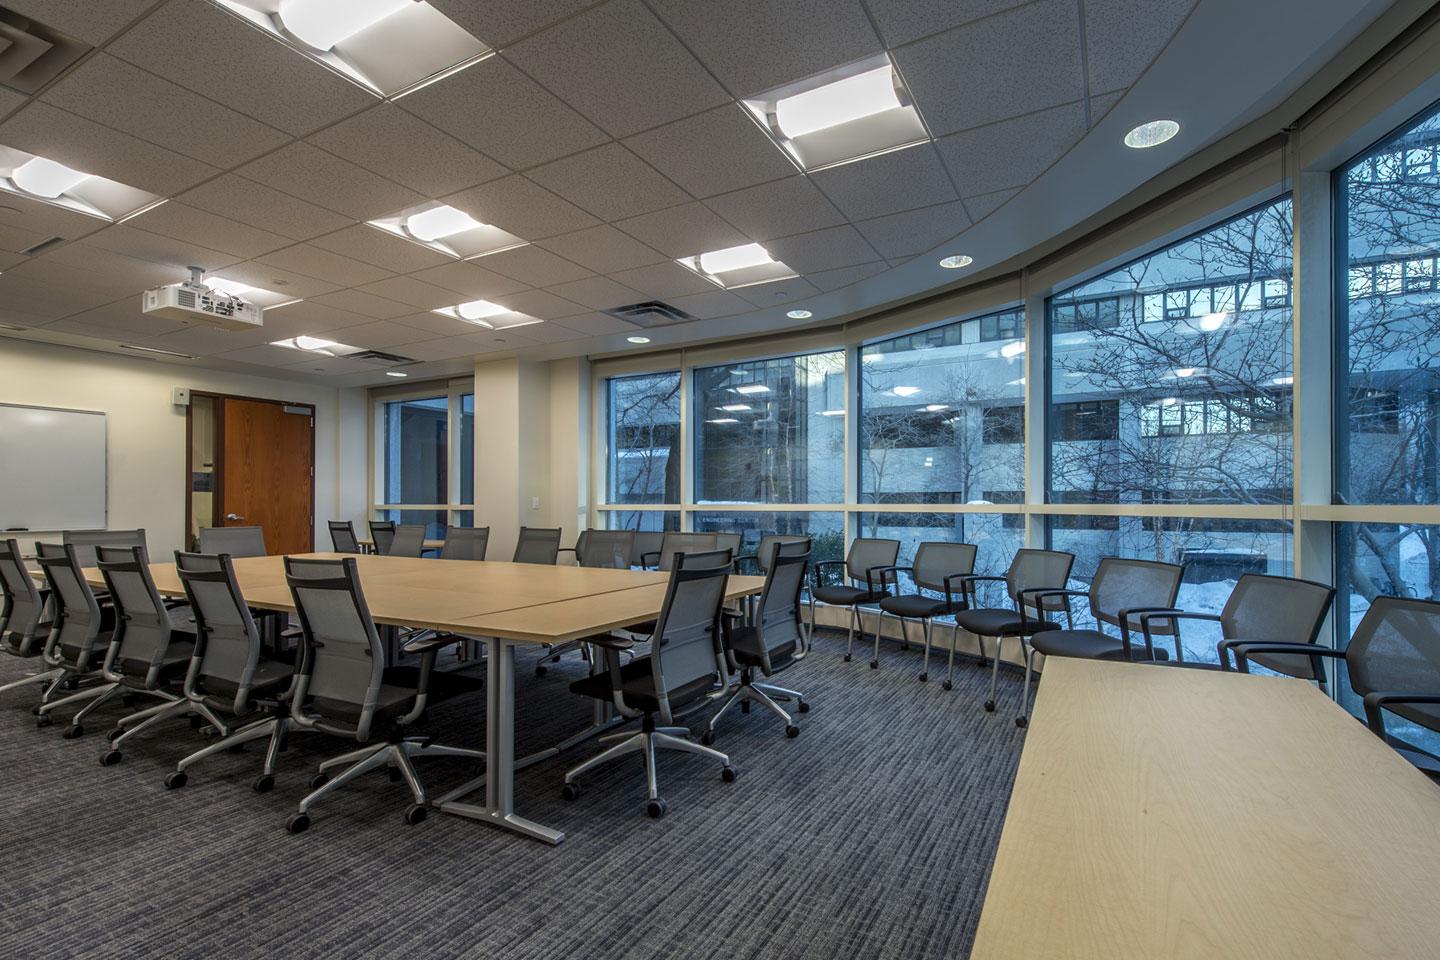 construction_-firm_mass_academic_meeting_space_NortheasternEgan1